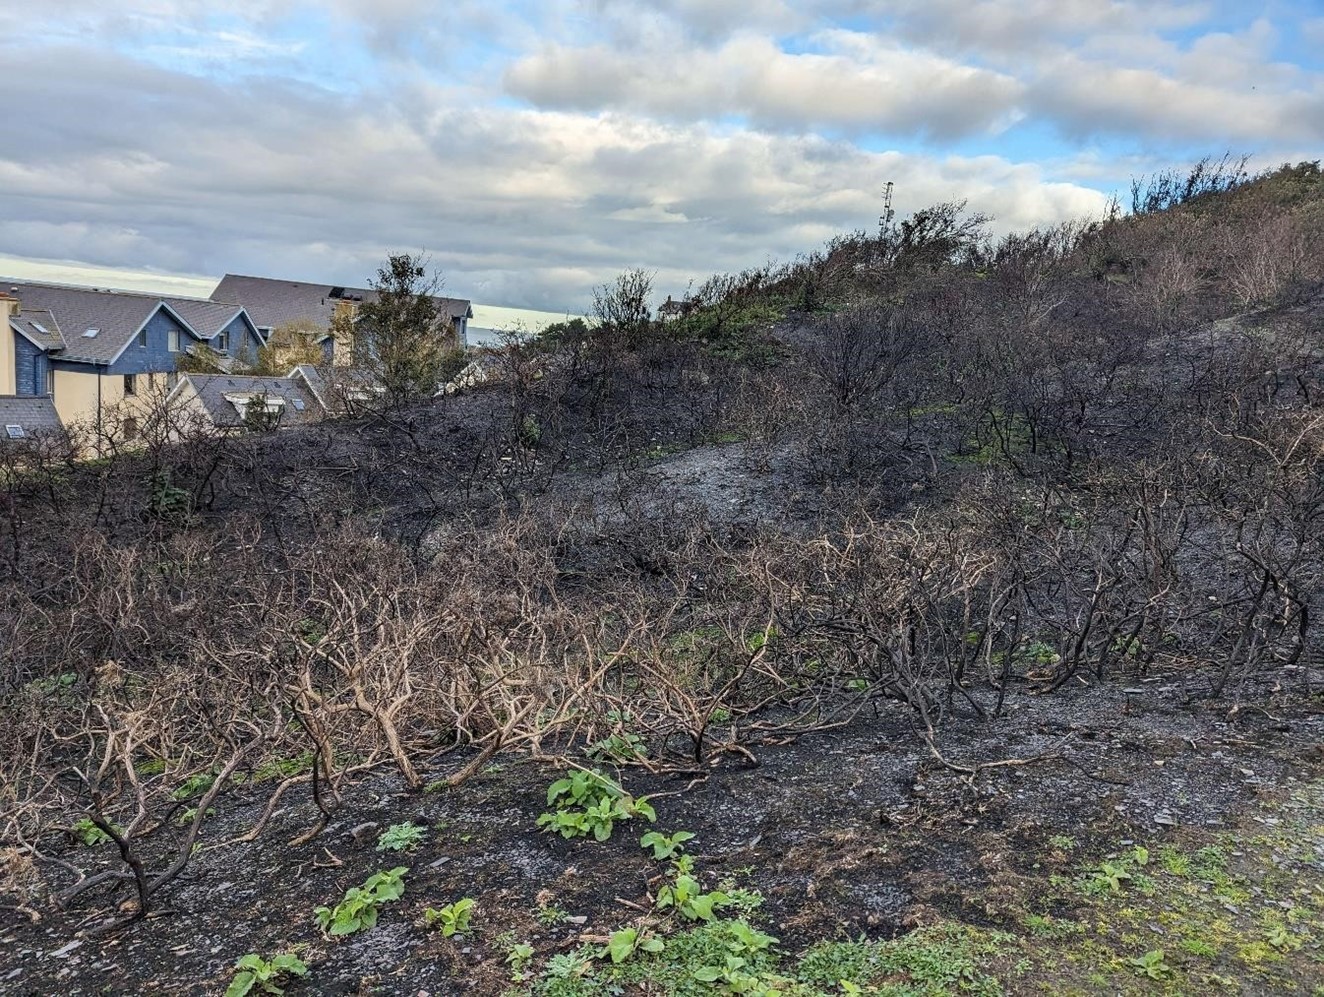 Wildfire in Penglais Woods - taken by student Carwyn Davies